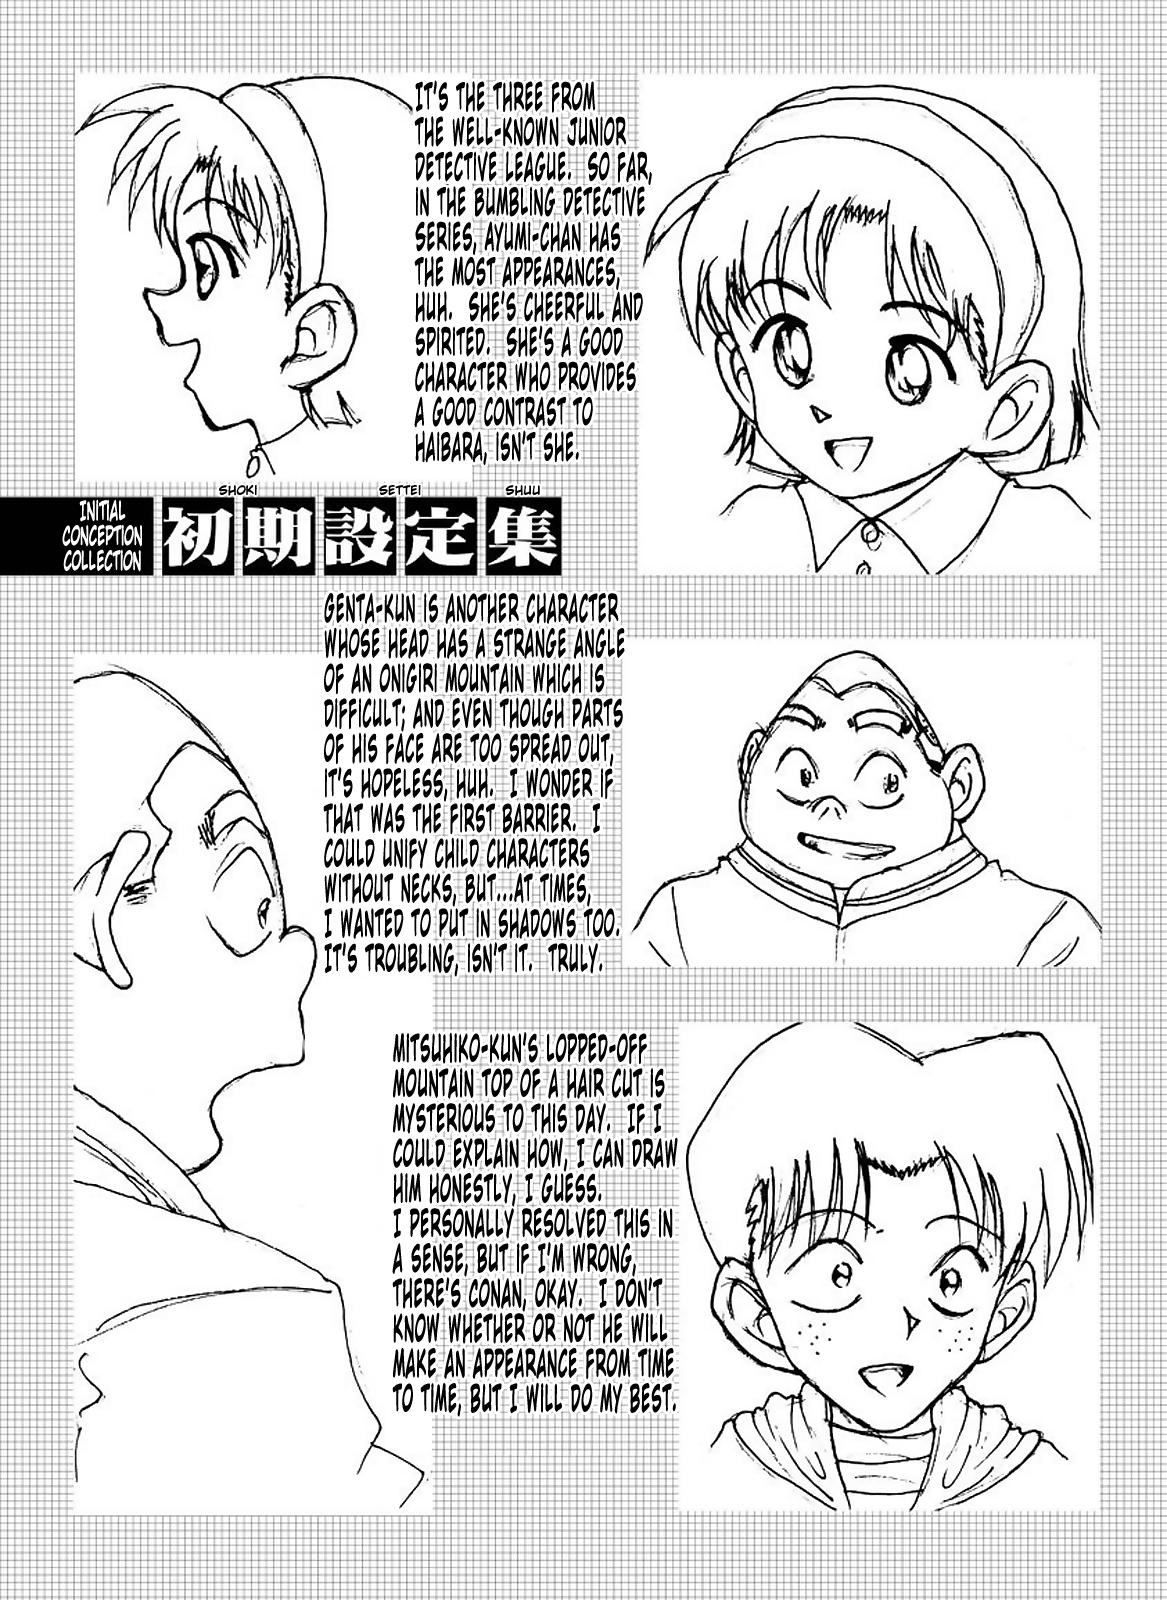 Bumbling Detective Conan - File 12: The Case of Back To The Future 25